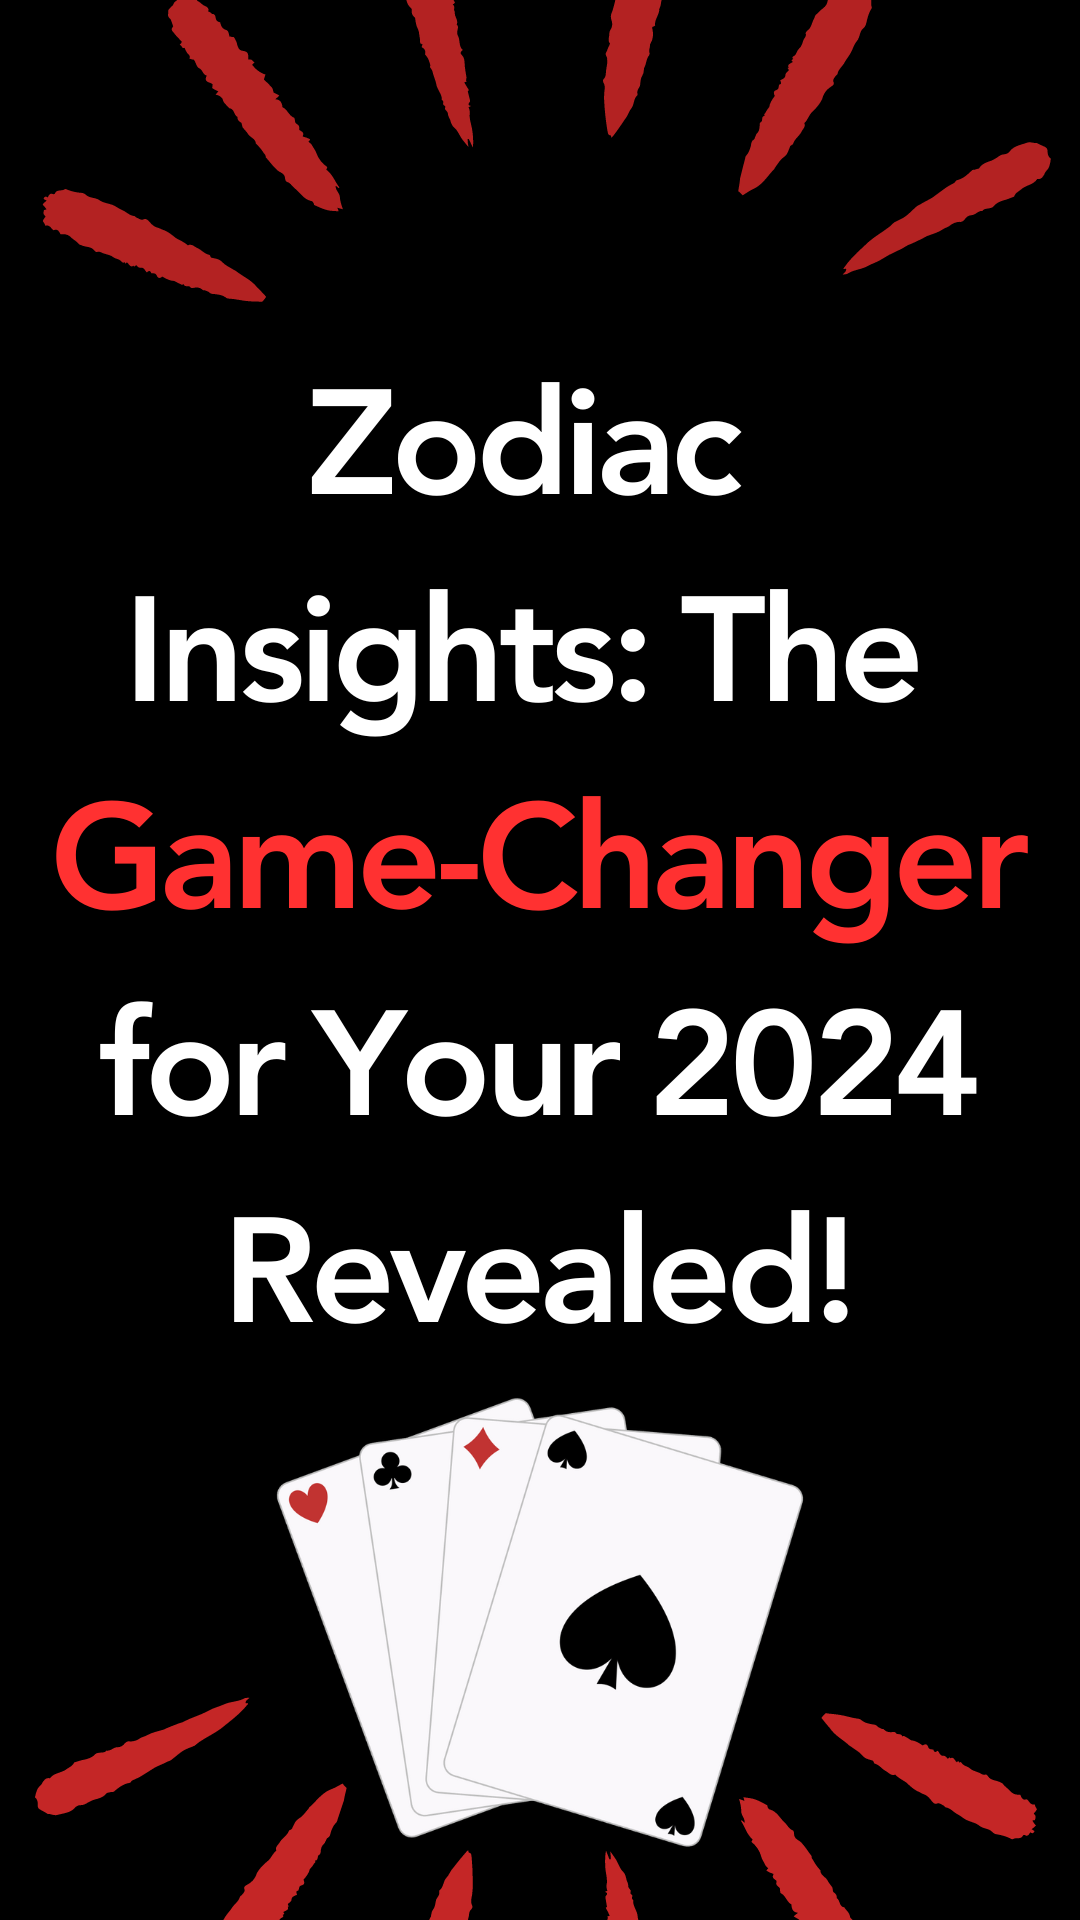 Zodiac Insights: The Game-Changer for Your 2024 Revealed!